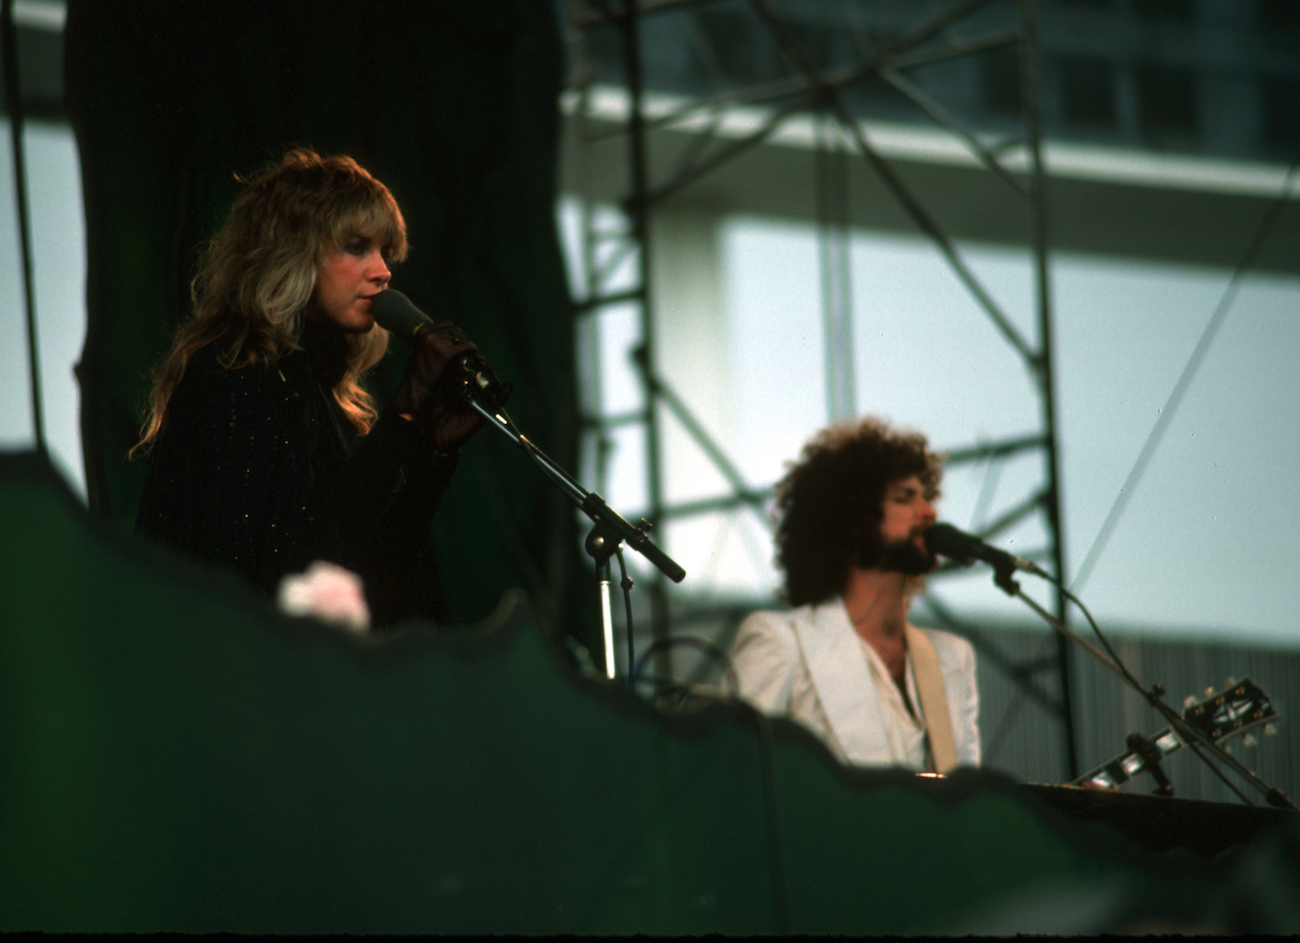 Stevie Nicks Said She and Lindsey Buckingham Will ‘Probably Keep Writing About Each Other Until We’re Dead’